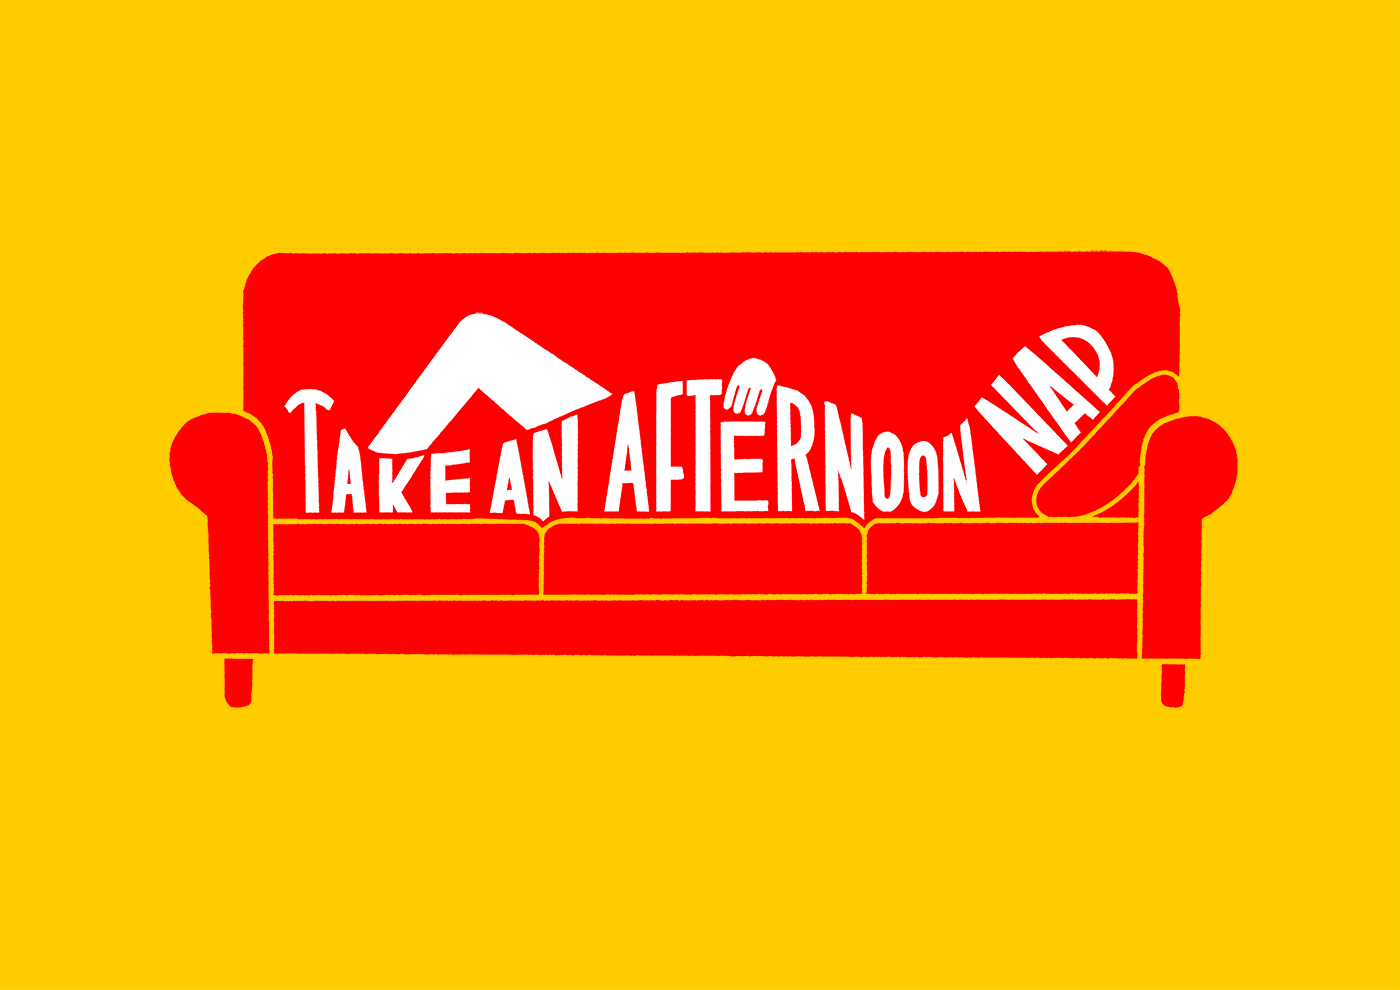 Take an afternoon nap